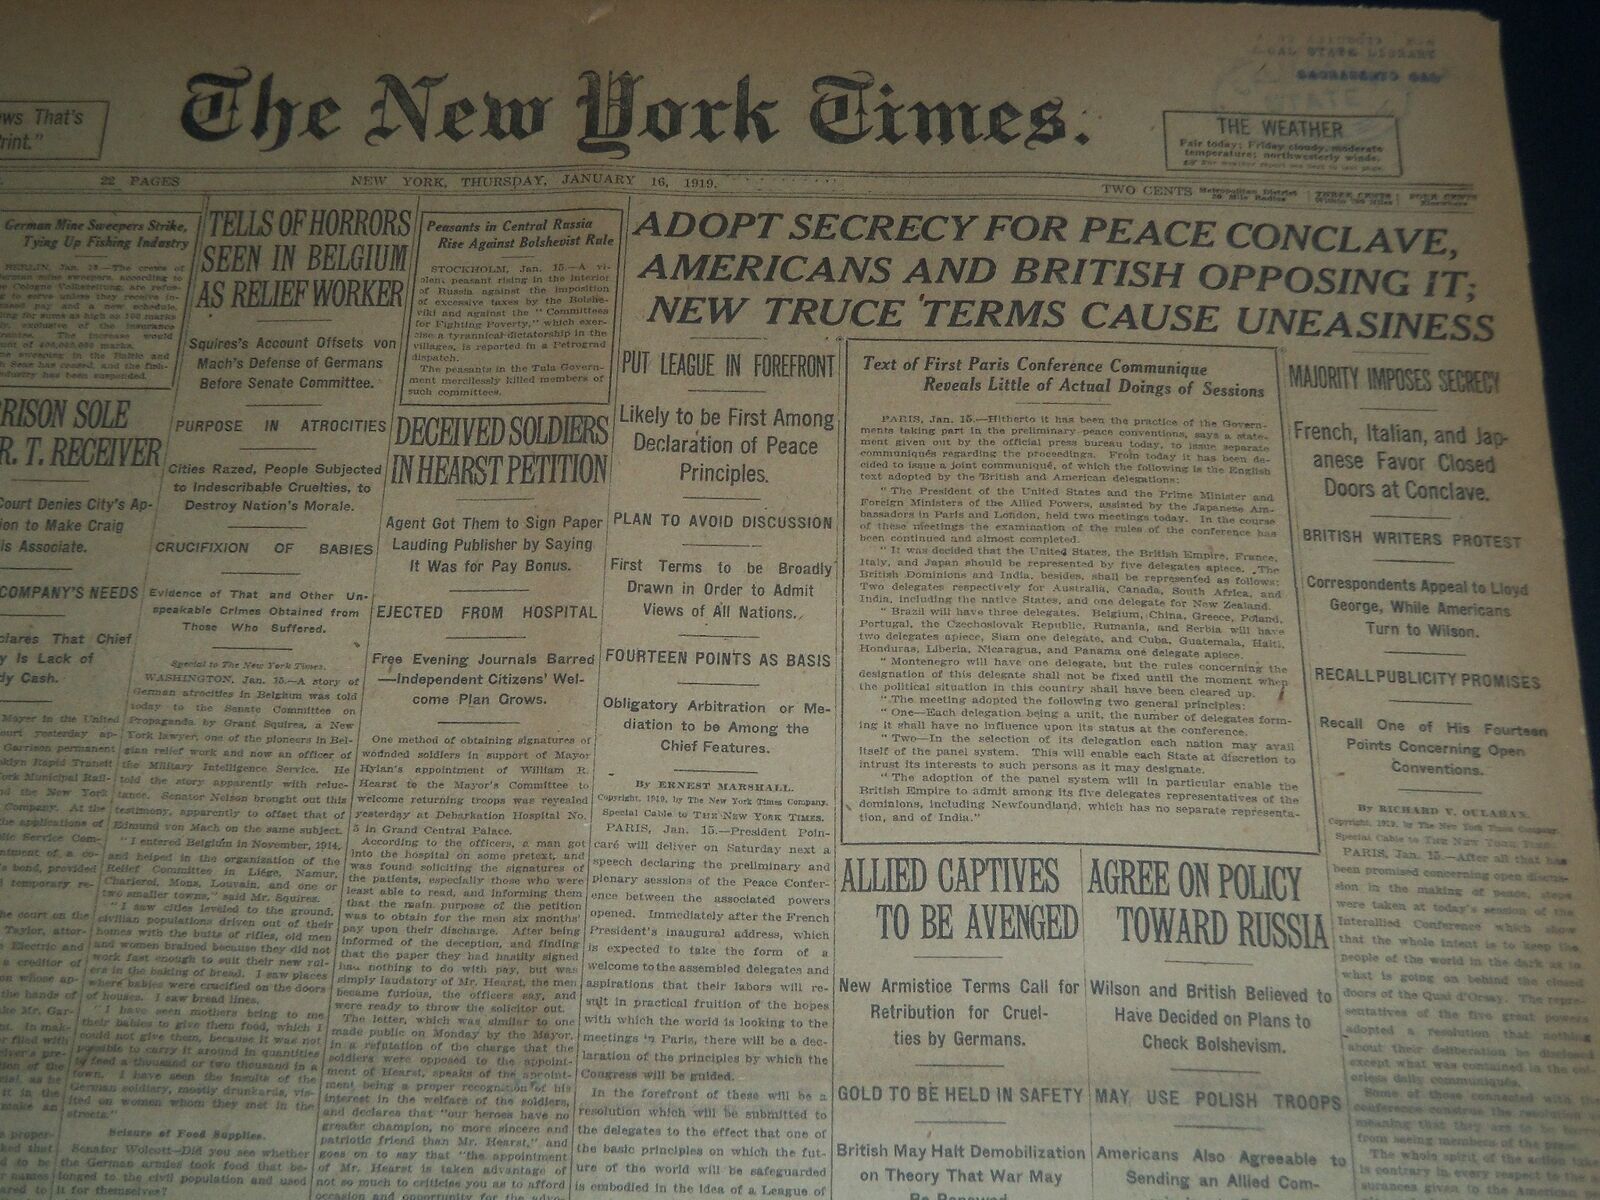 1919 JANUARY 16 NEW YORK TIMES NEWSPAPER - ADOPT SECRECY FOR PEACE - NT 7520